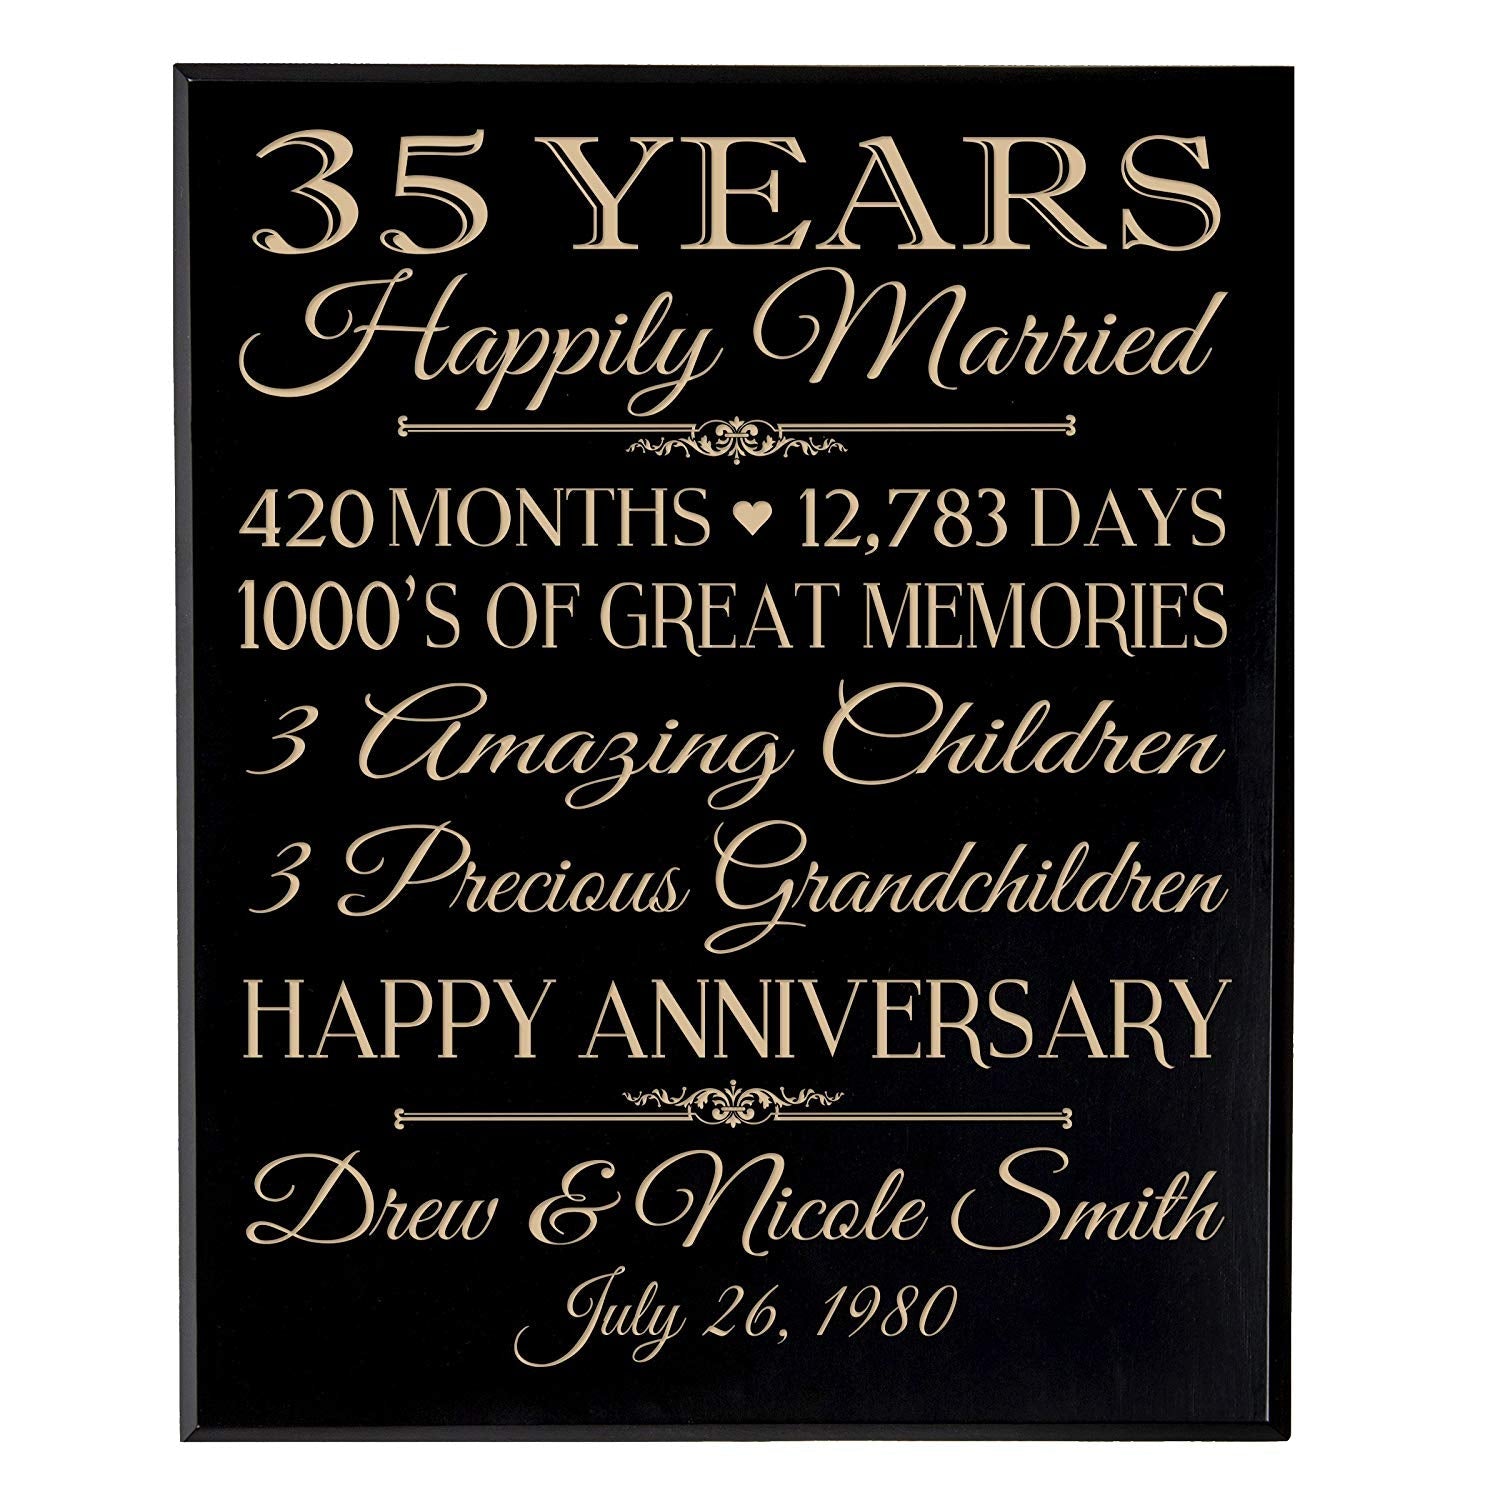 Personalized 35th Anniversary Wall Plaque - Happily Married - LifeSong Milestones